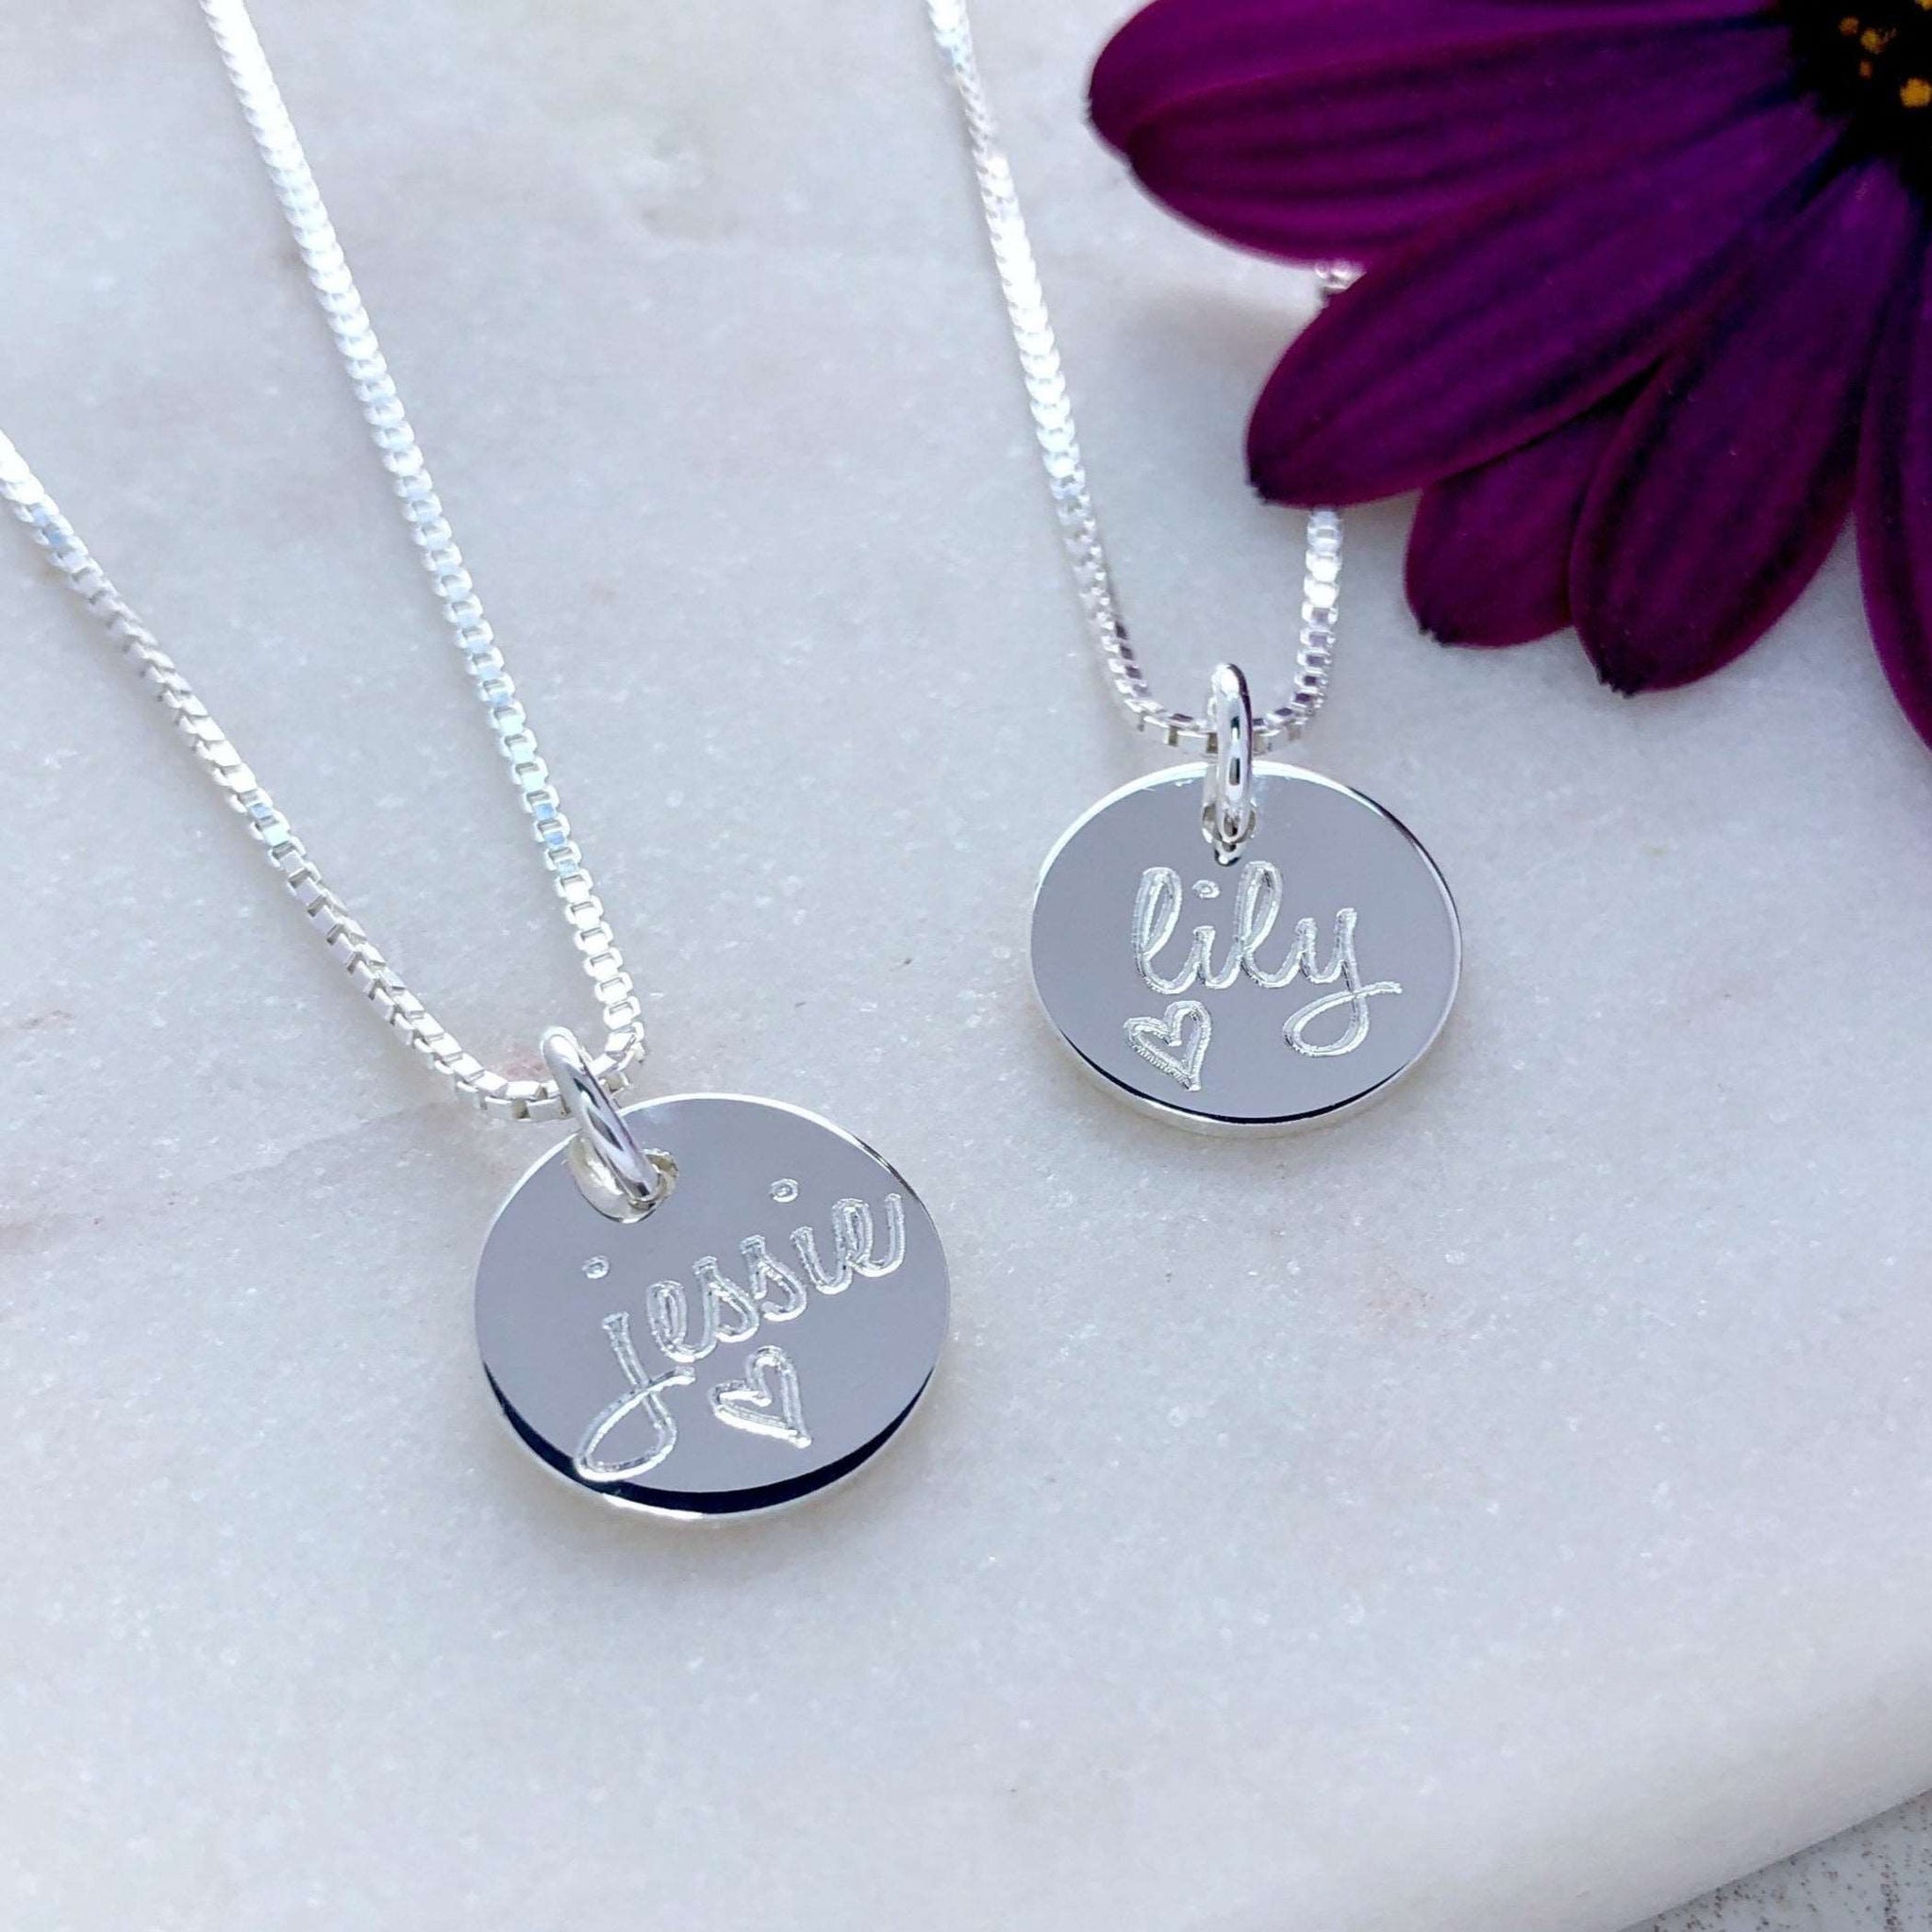 Engraved sterling silver necklace, 12mm wide silver disc